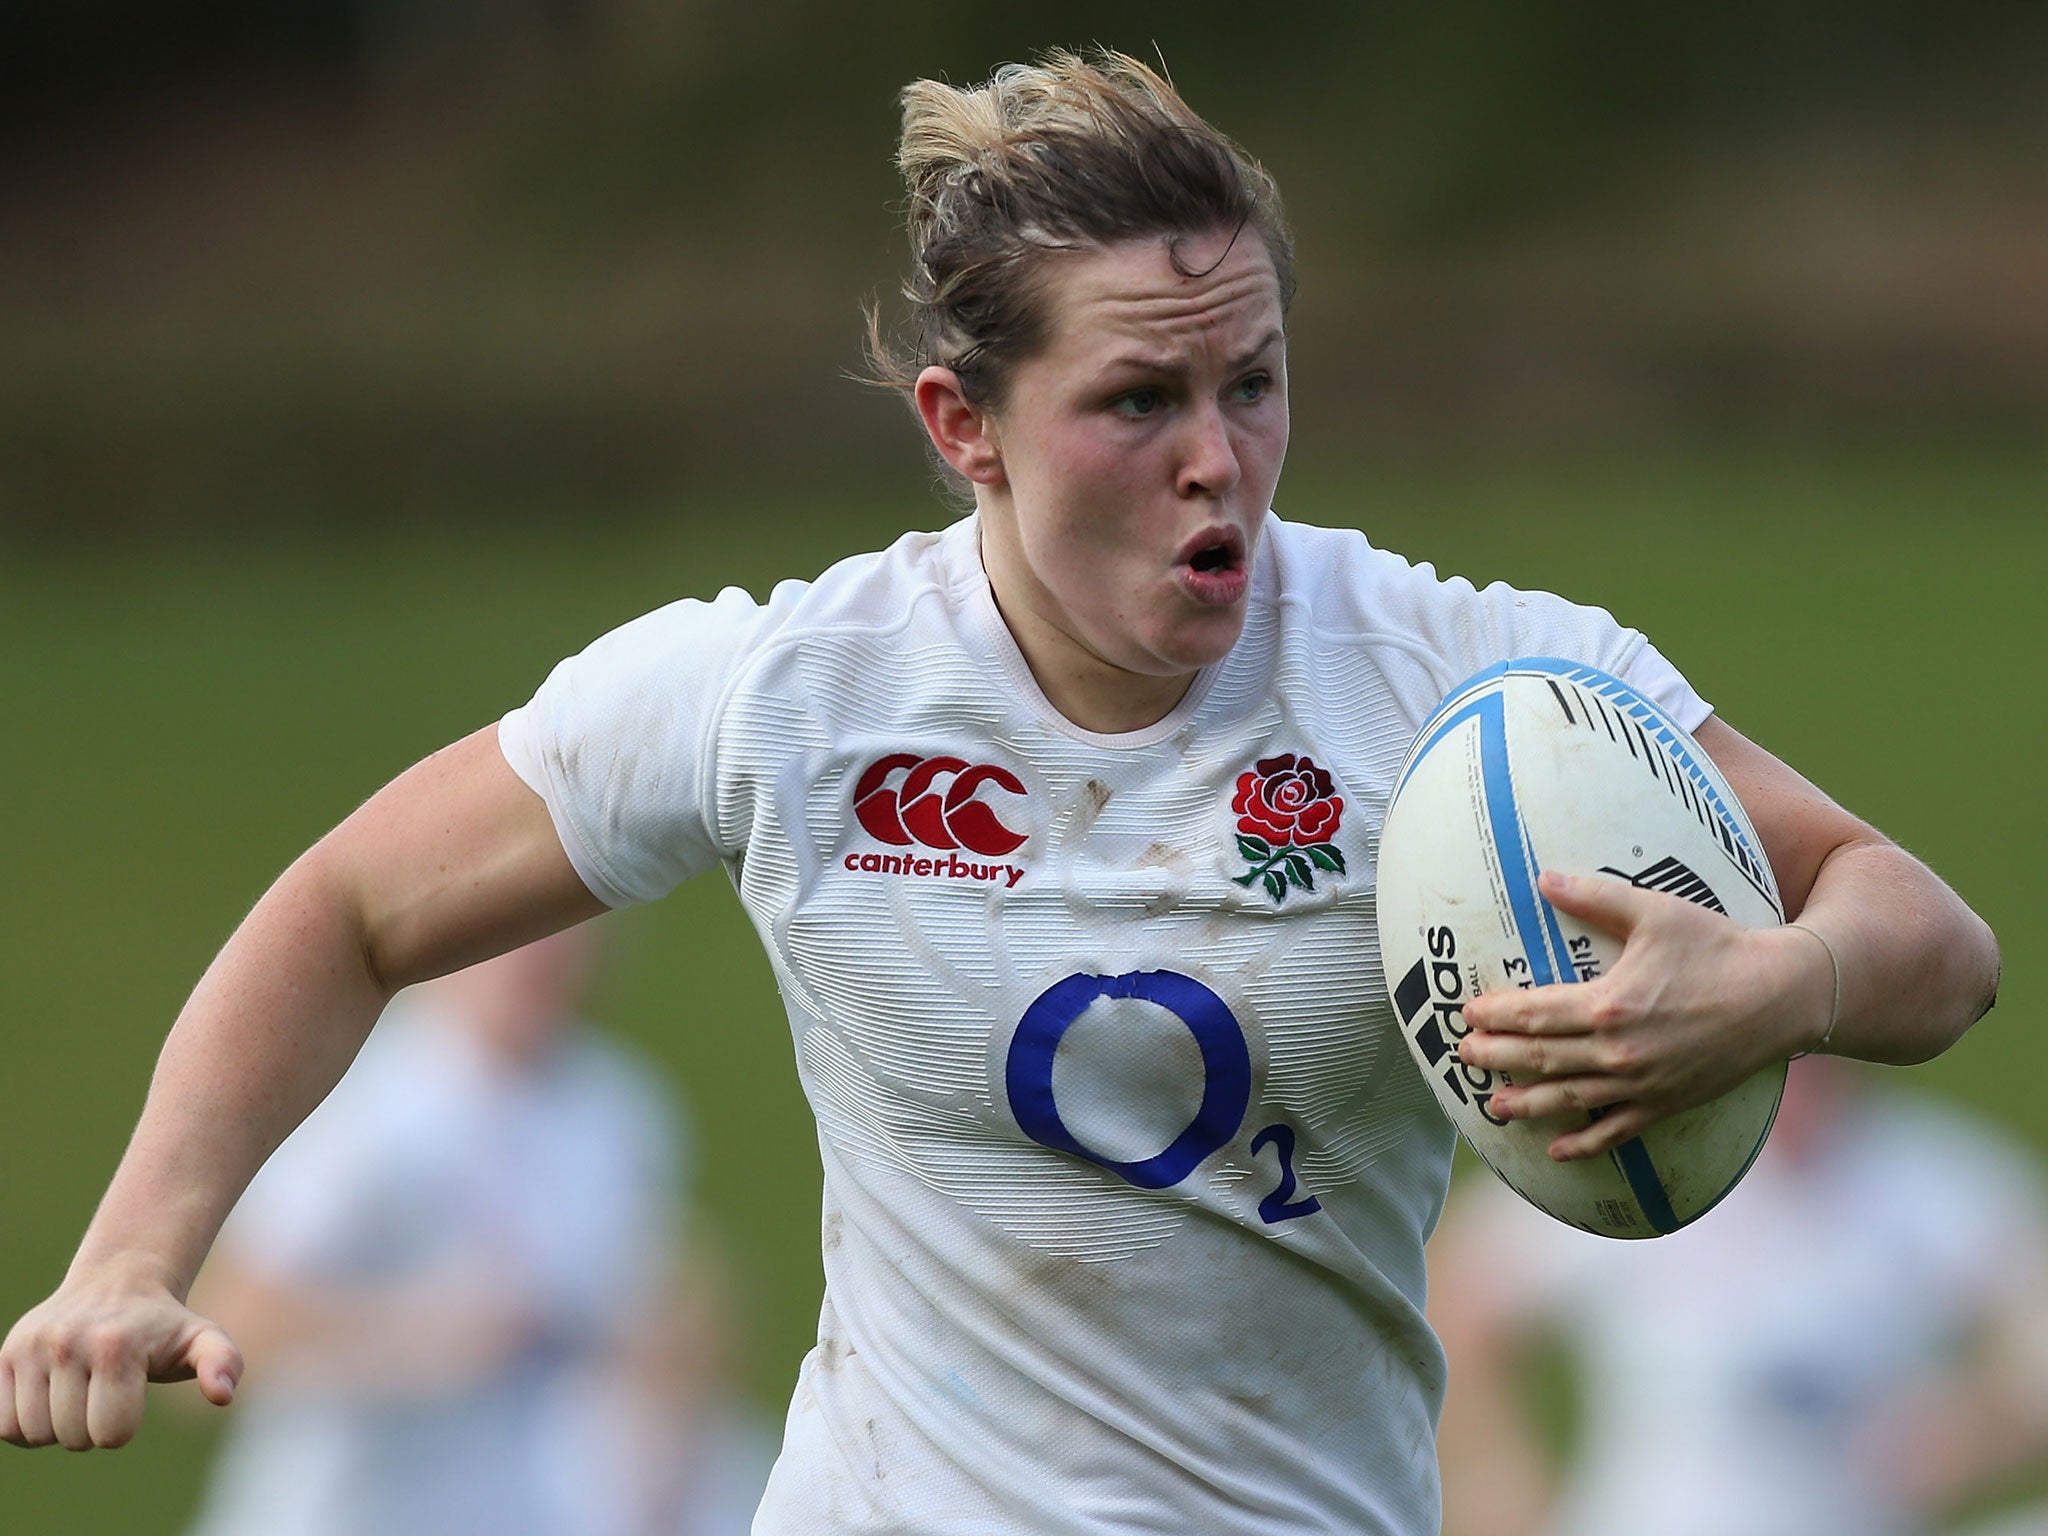 Marlie Packer will start for England against Samoa in the Rugby World Cup